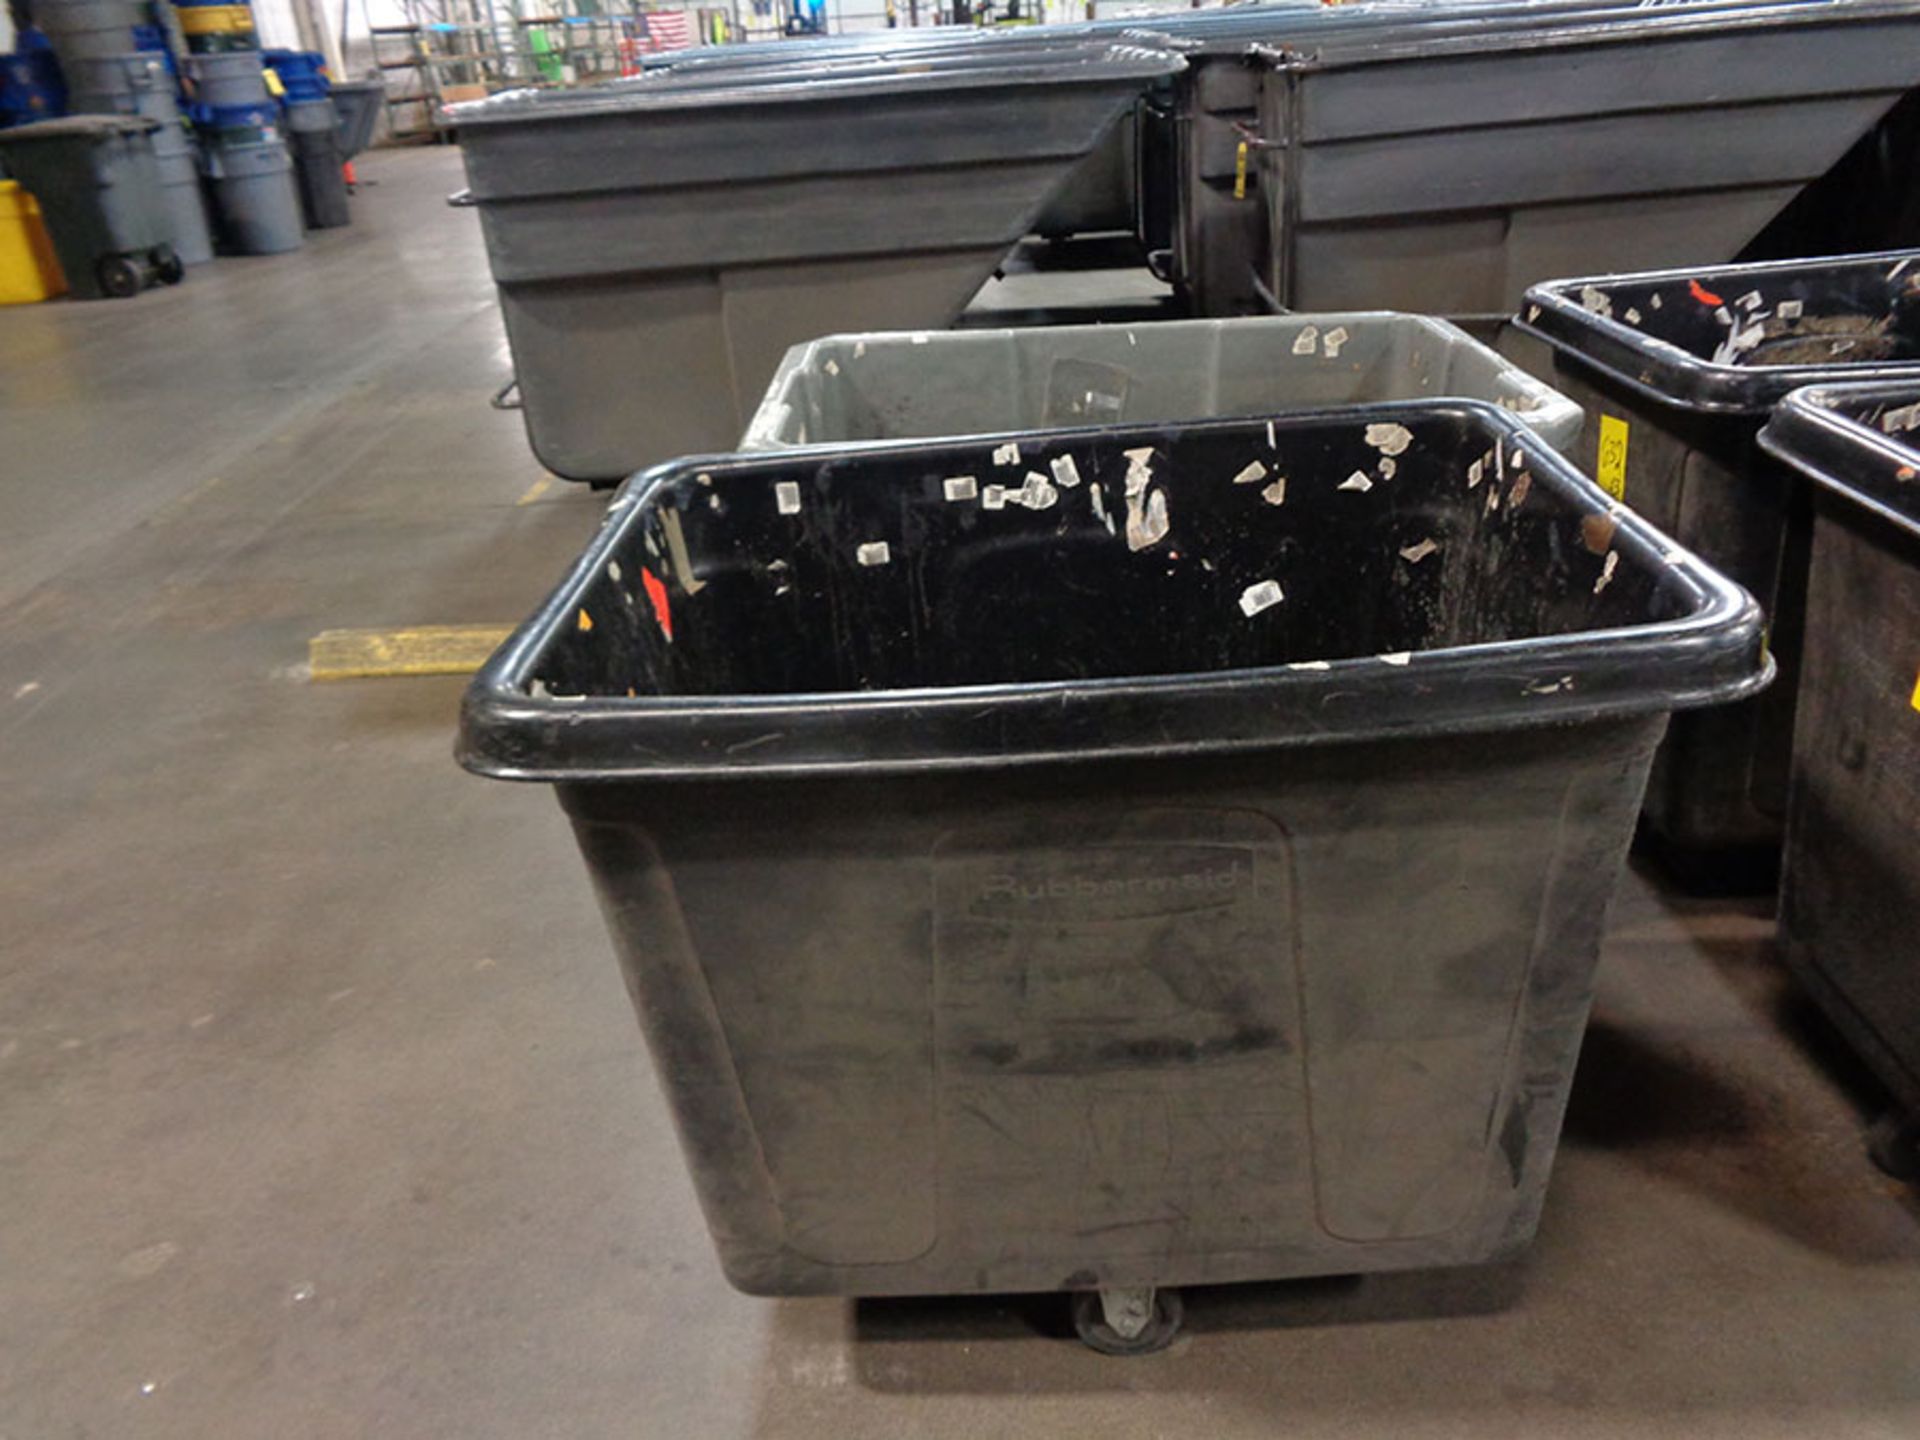 (3) RUBBERMAID UTILITY CARTS